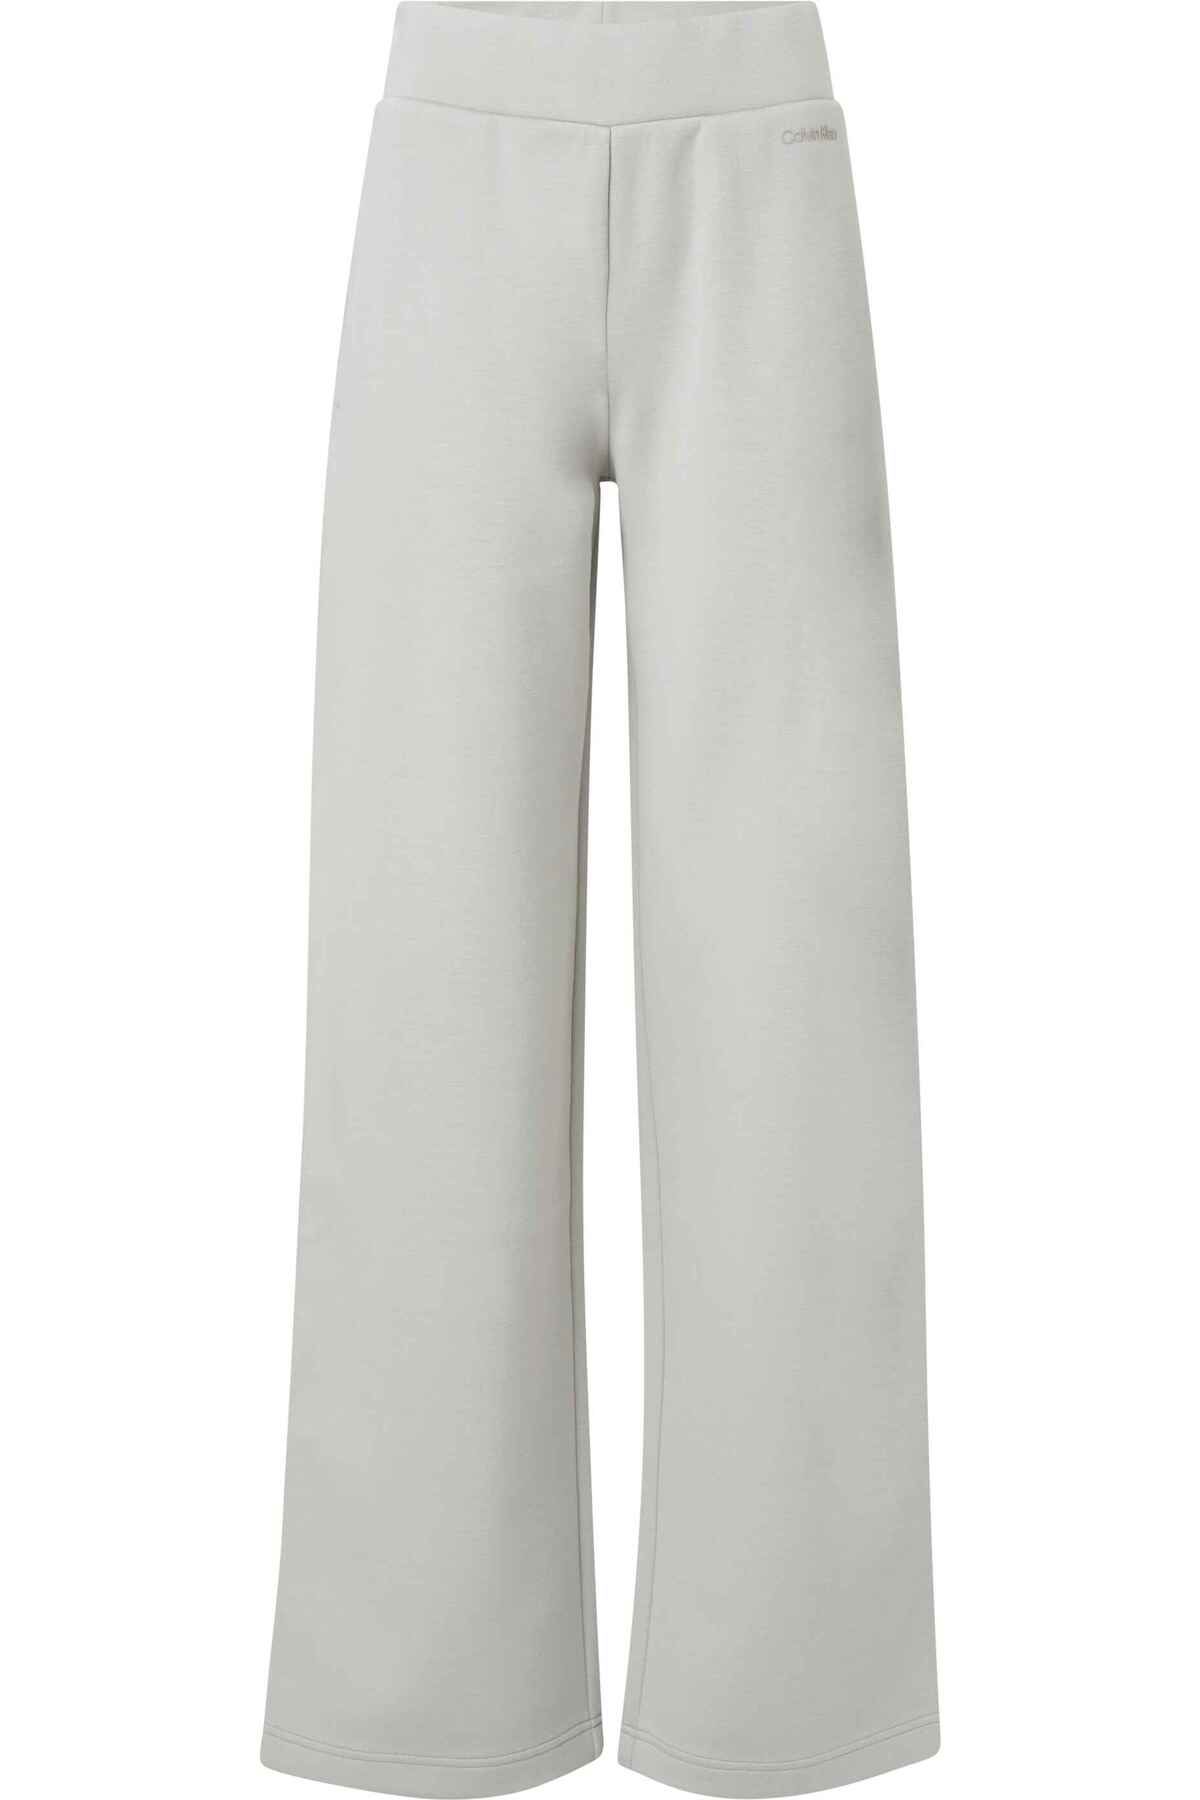 Calvin Klein JERSEY TAILORED TRACK PANT